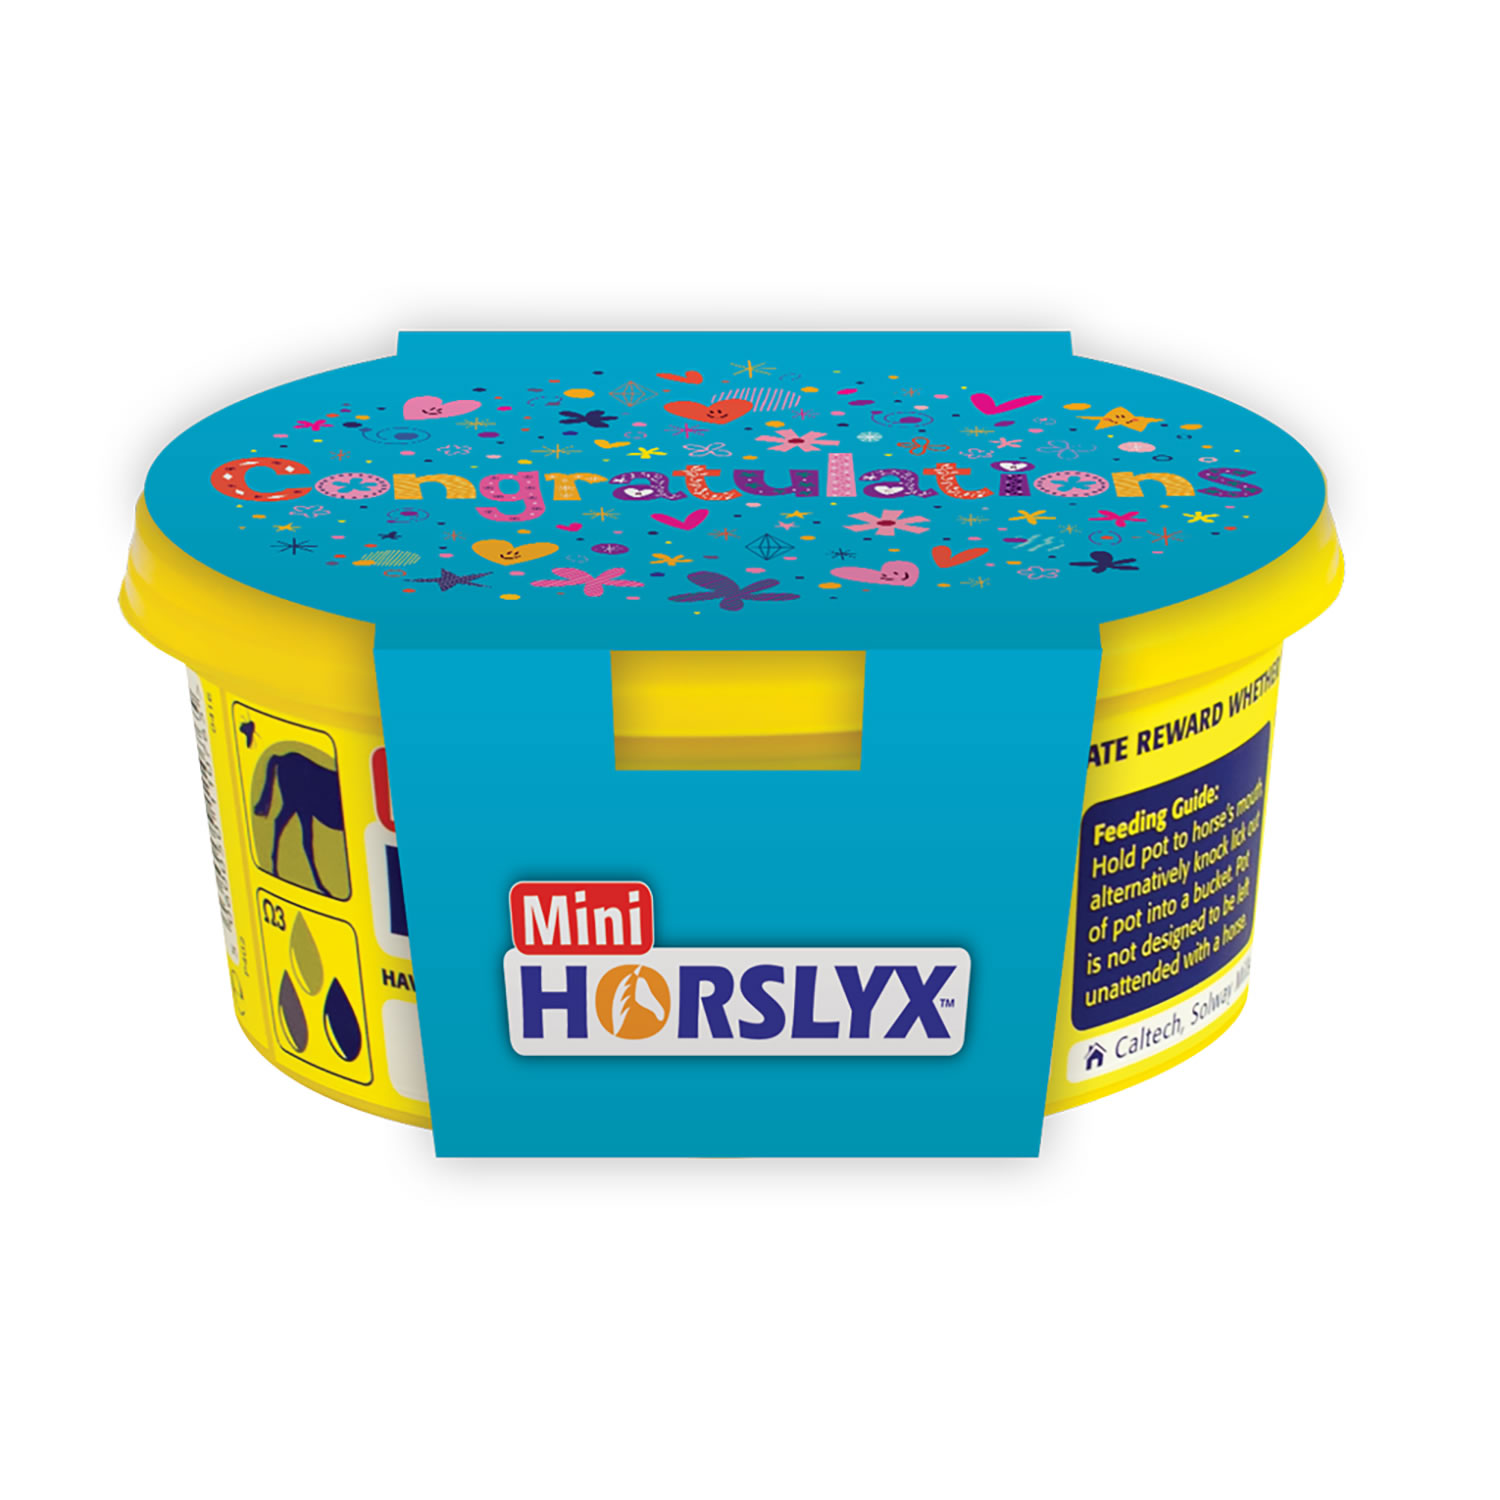 HORSLYX MINI GIFT SLEEVES 6 PACK 6 PACK CONGRATULATIONS